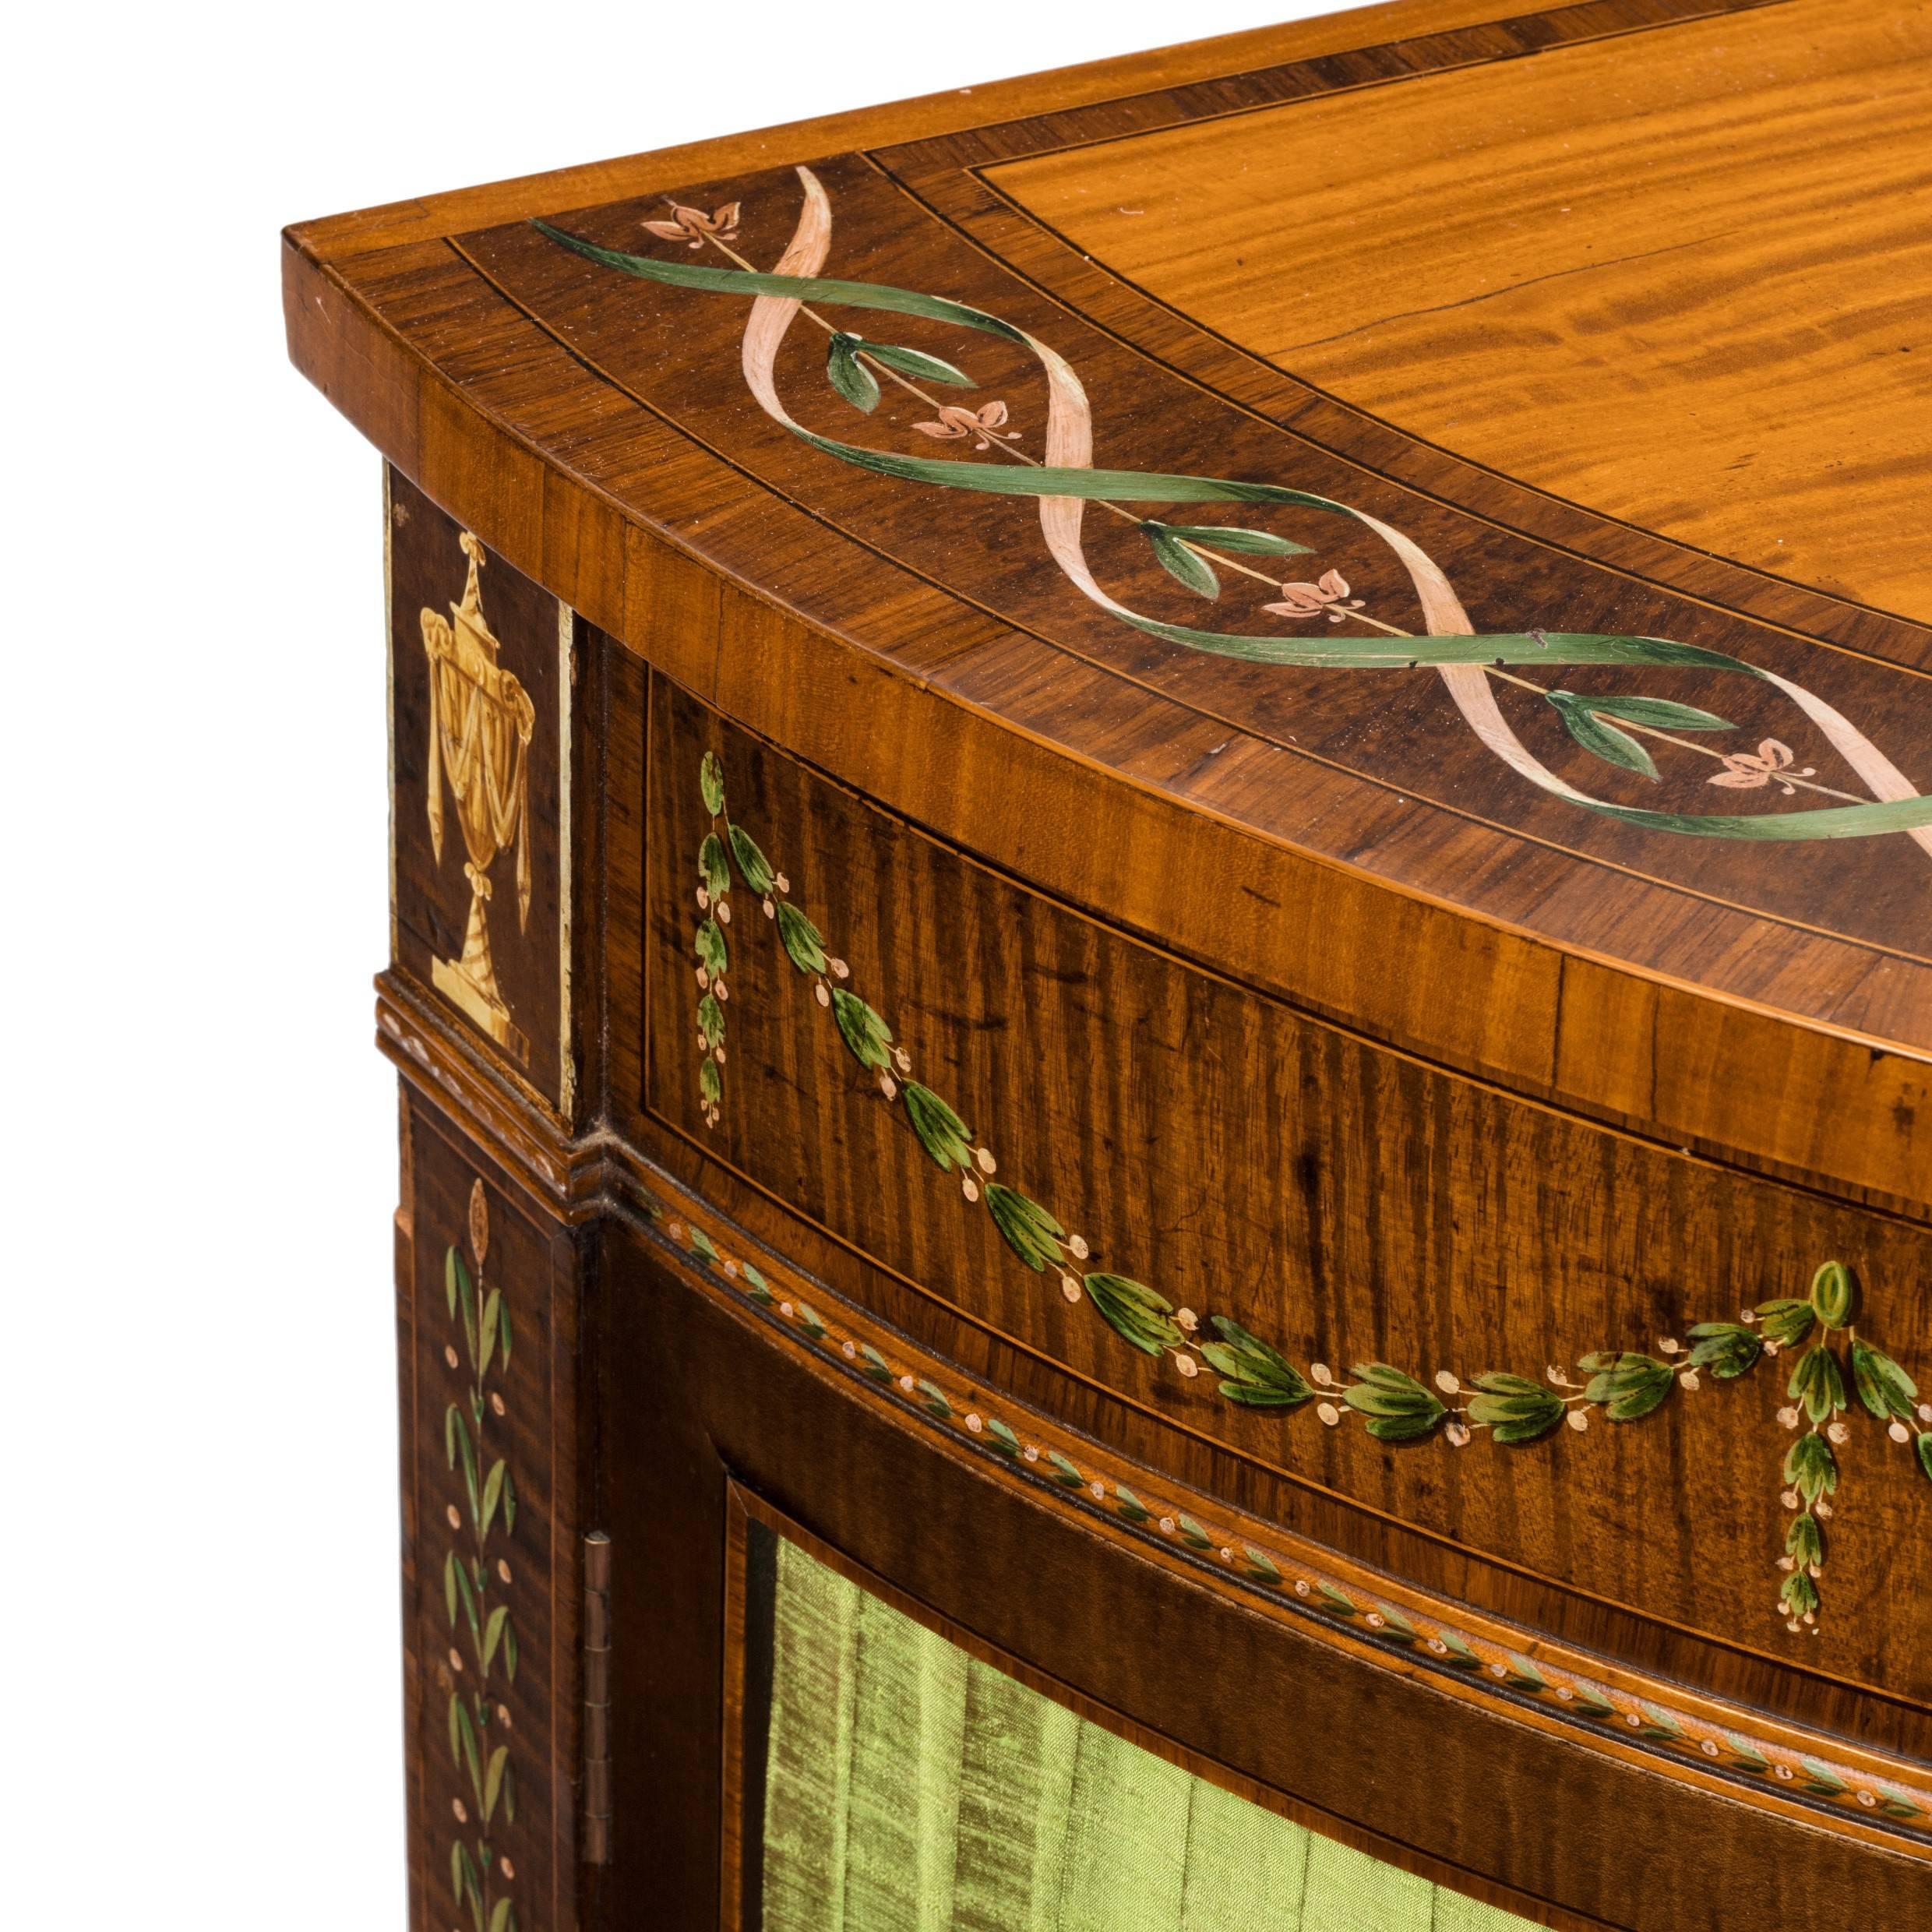 Victorian satinwood demilune commode in the Sheraton Revival taste, with a central door showing a painted romantic scene between two panels of pleated silk, decorated throughout with delicate bands of flowers and bellflower swags in stained boxwood.